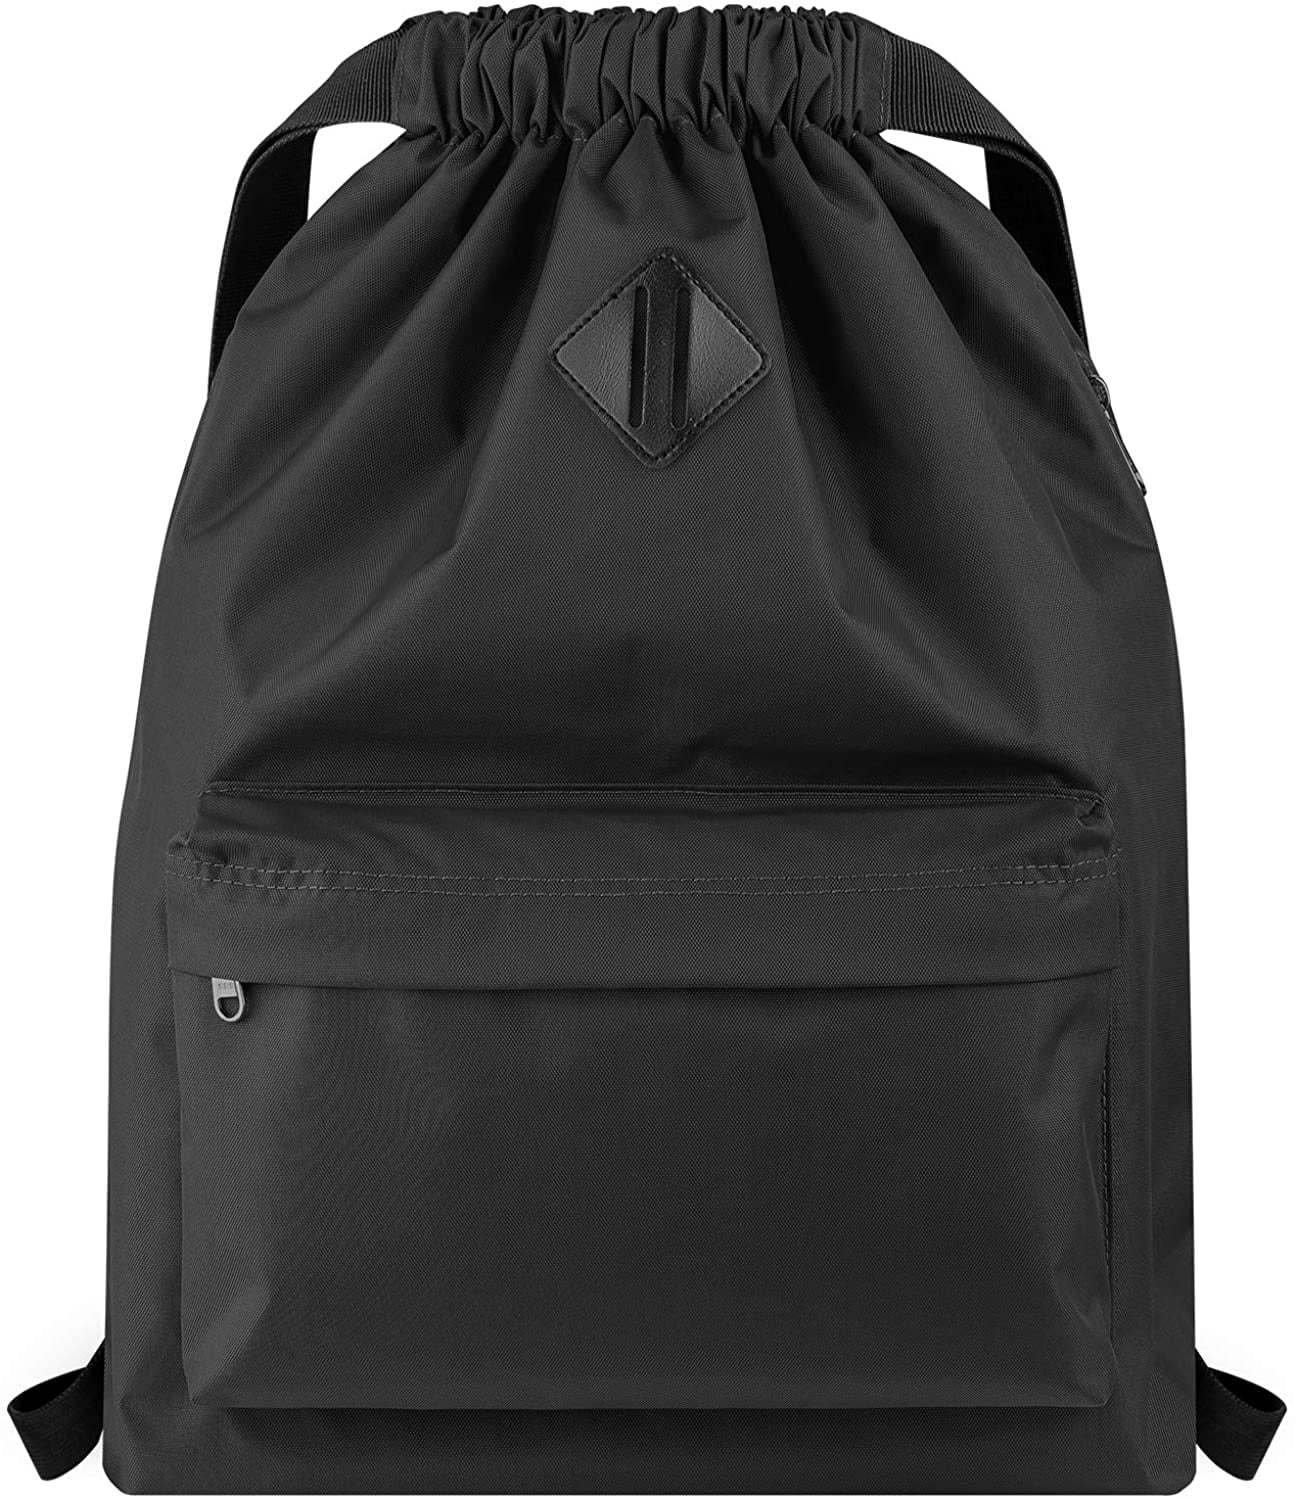 Drawstring Backpack,Ultra-Large Capacity Drawstring Backpack Bags,Use for Gym,Shopping,Sport,Yoga or Other Outdoor Activities,Black 